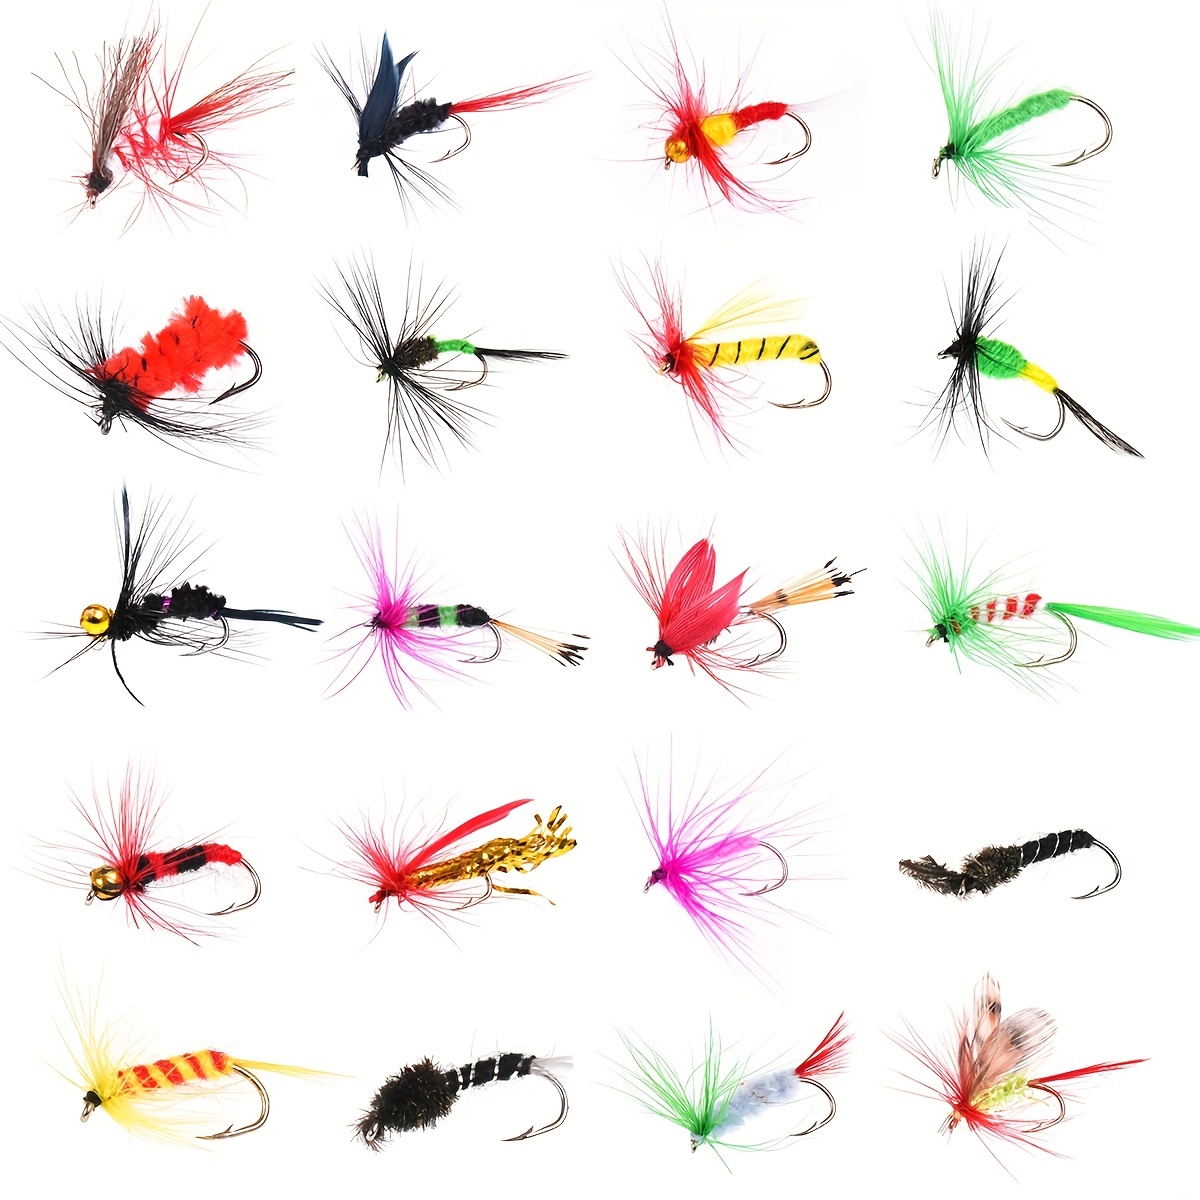 100pcs Premium Handmade Fly Fishing Lures Kit - Includes Dry/Wet *  Streamers, and Assorted * for Trout and Bass Fishing - Comes with Durable